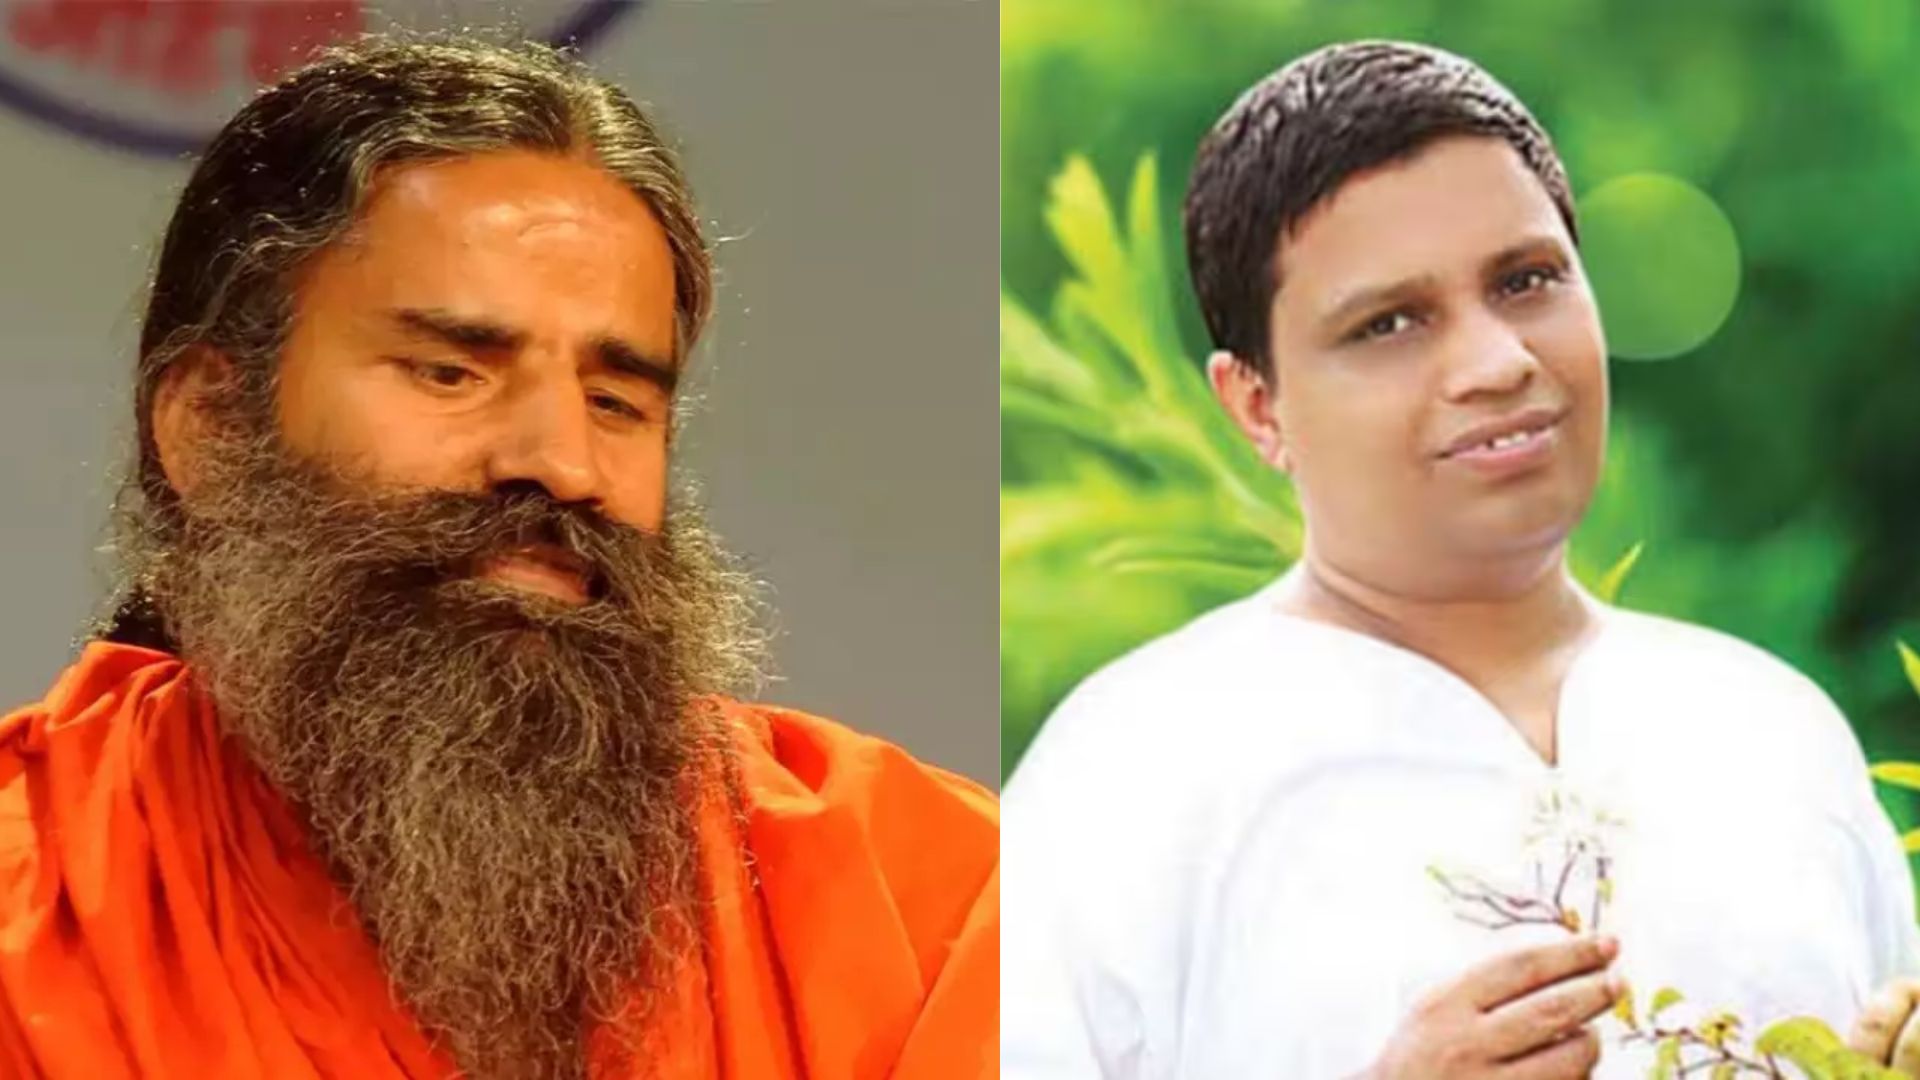 Patanjali misleading ad case: Ramdev and Balkrishna issues apology today after SC’s direction